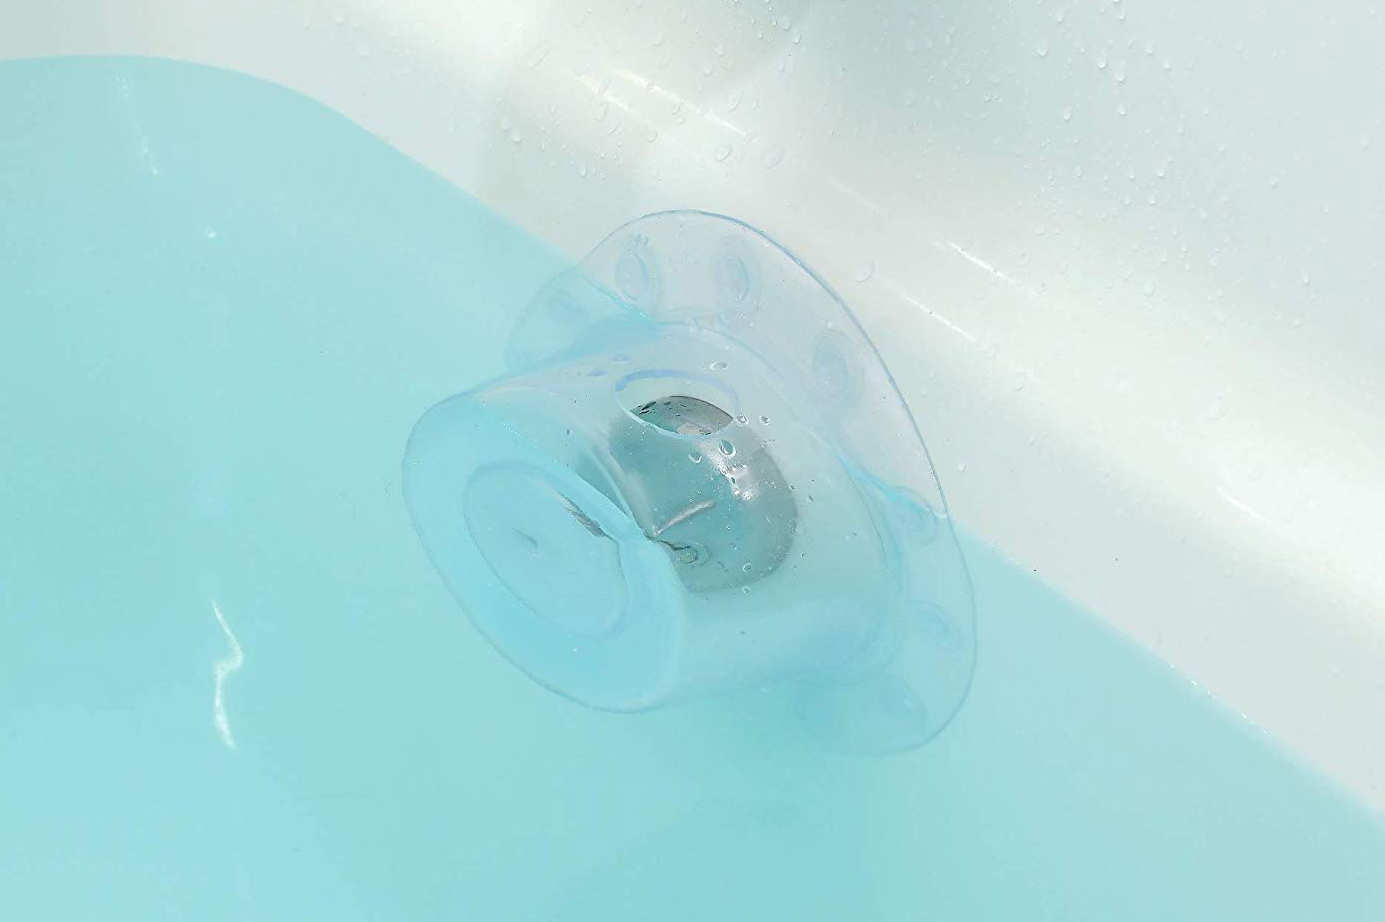 SlipX Solutions Bottomless Bath Overflow Drain Cover Review